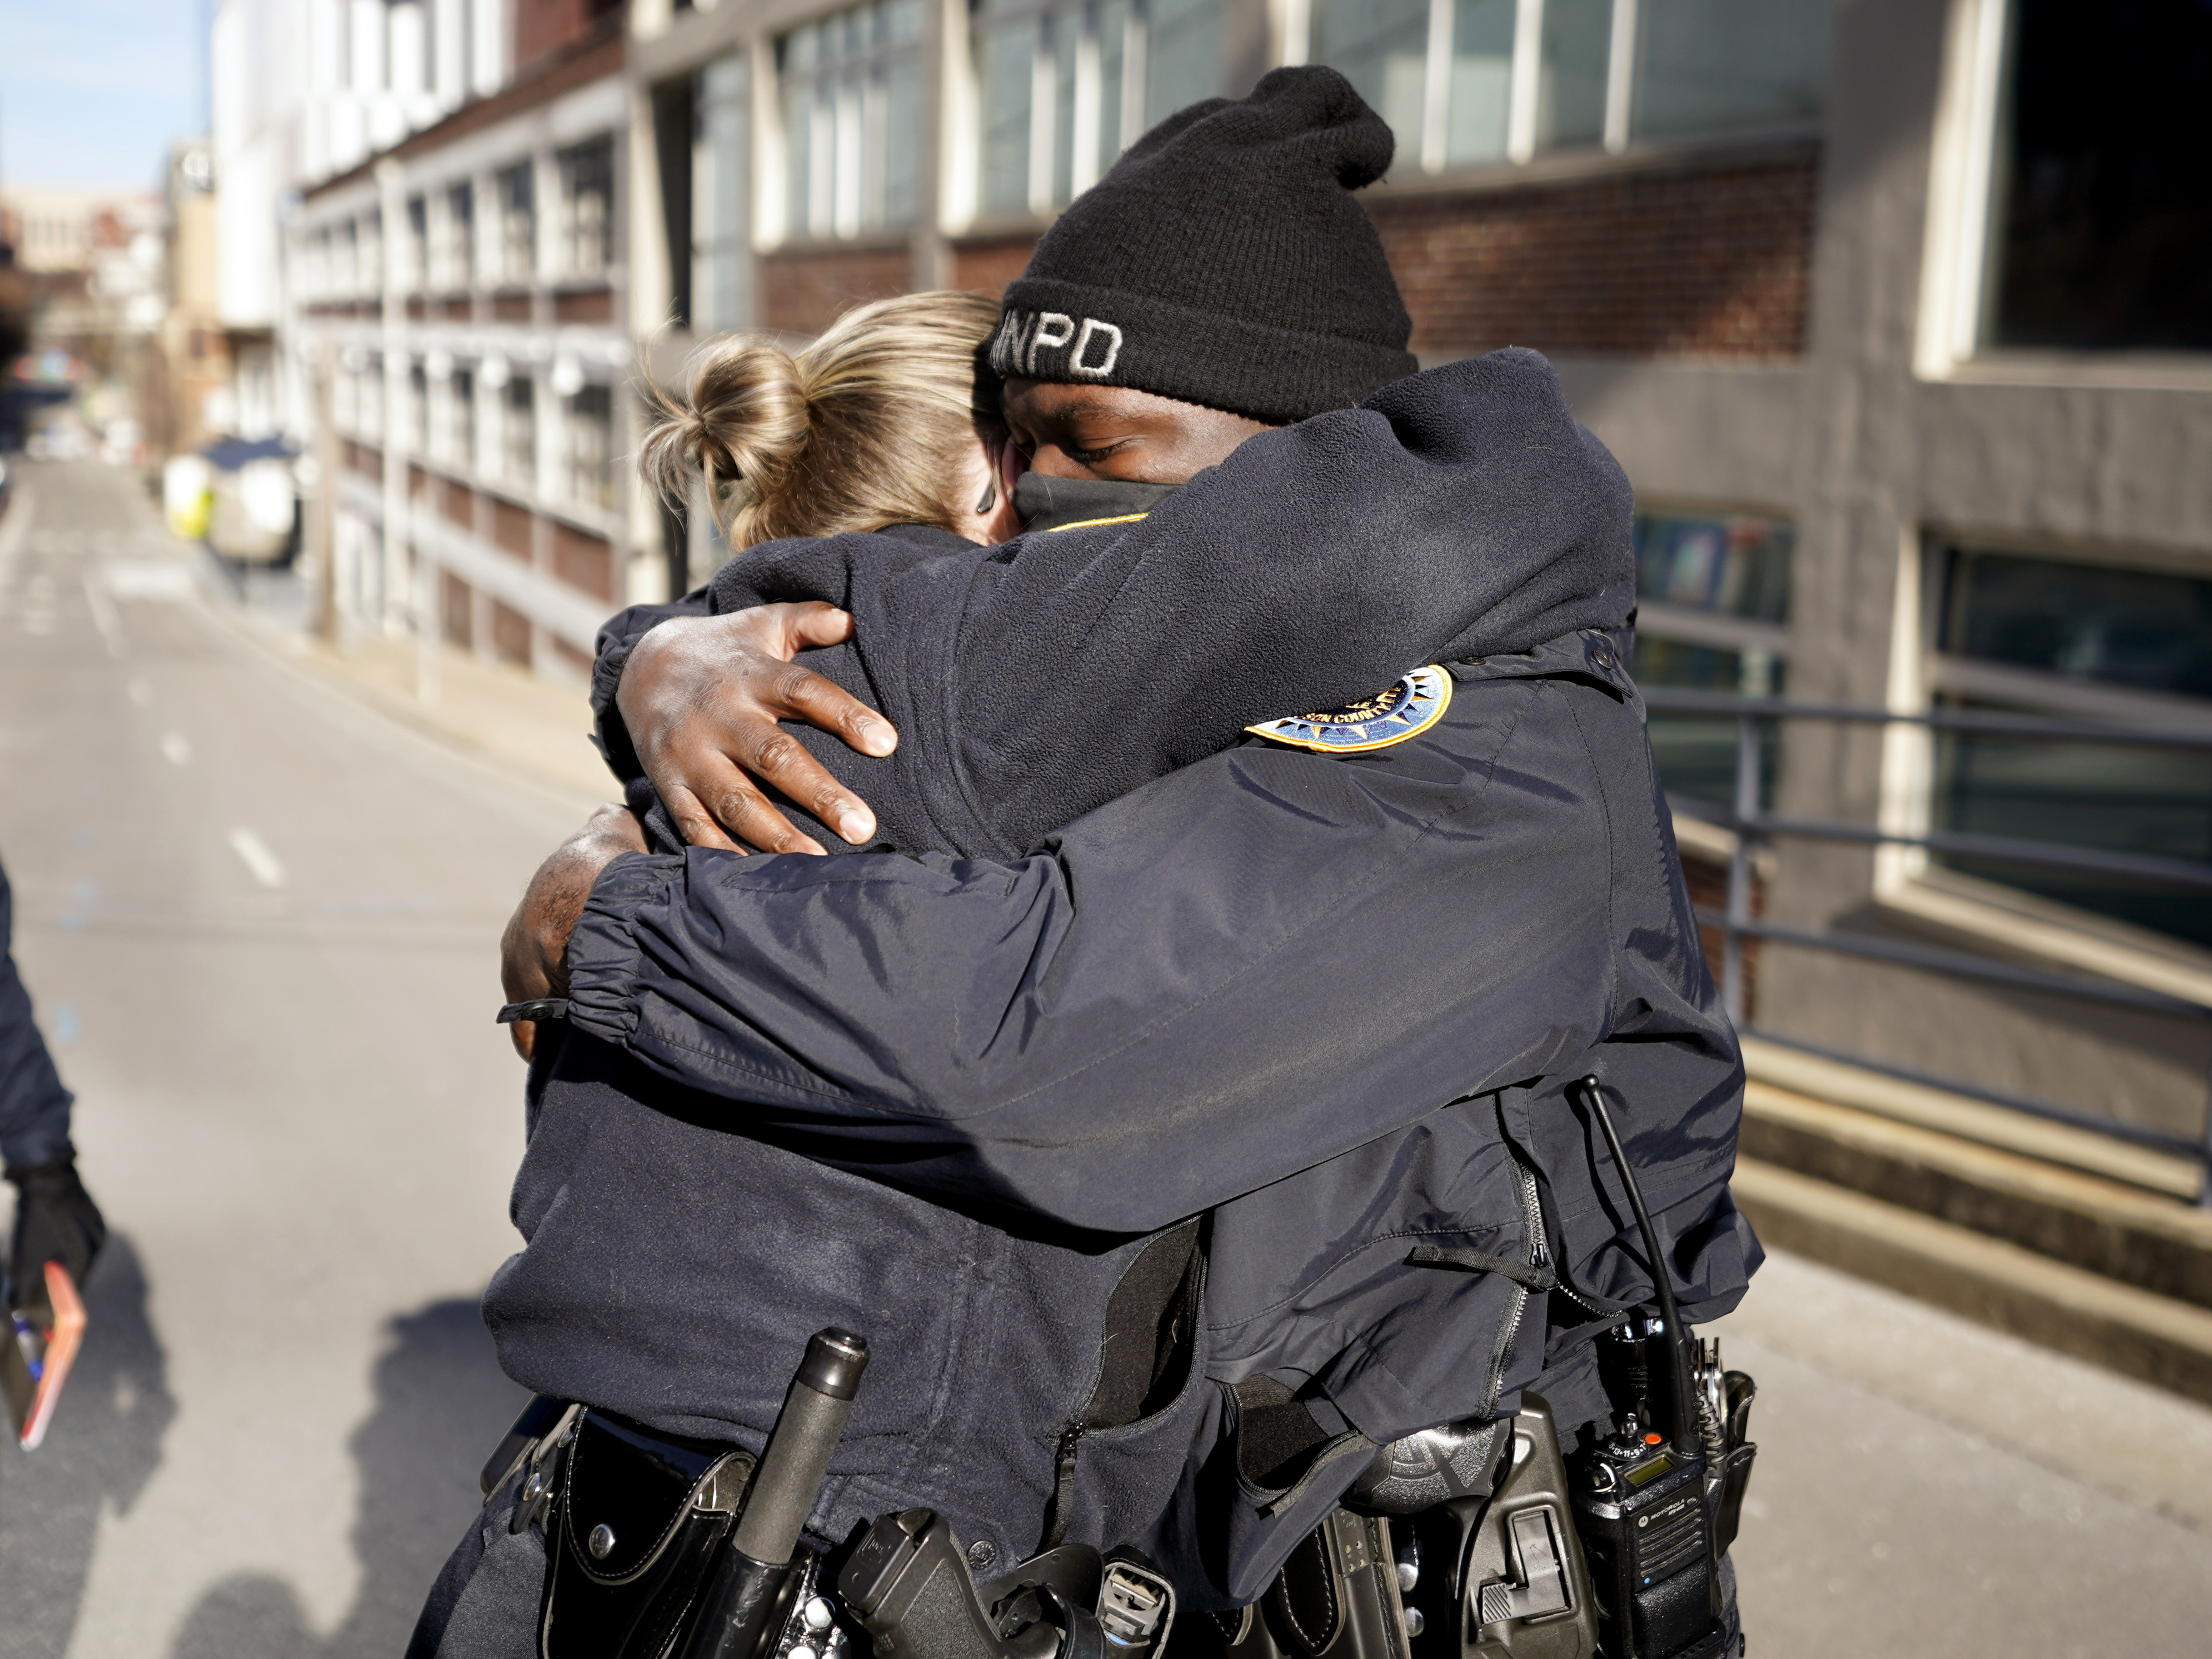 Nashville, Tenn., police officers Brenna Hosey and James Wells embrace after speaking at a news conference on Sunday. Hosey and Wells are part of a group of officers credited with evacuating people before the explosion that occurred in downtown Nashville early Christmas morning. CREDIT: Mark Humphrey/AP